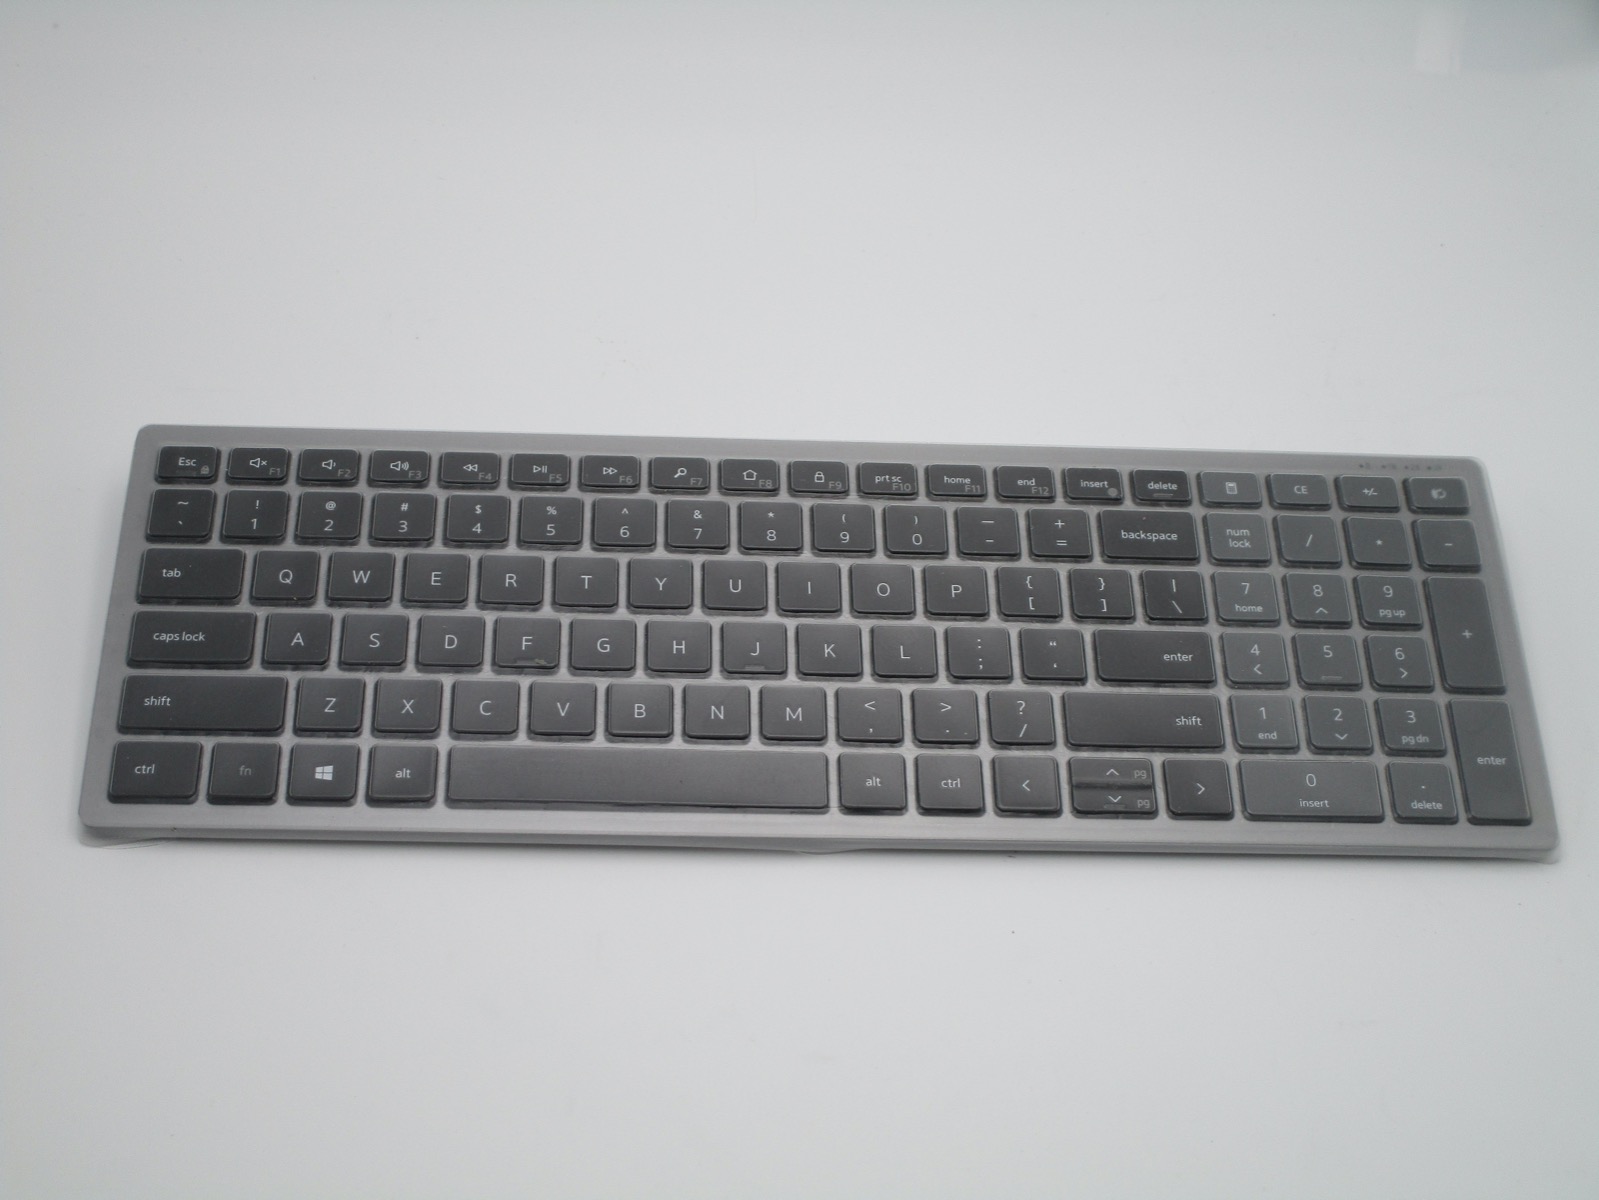 Dell KM7120W Keyboard Cover